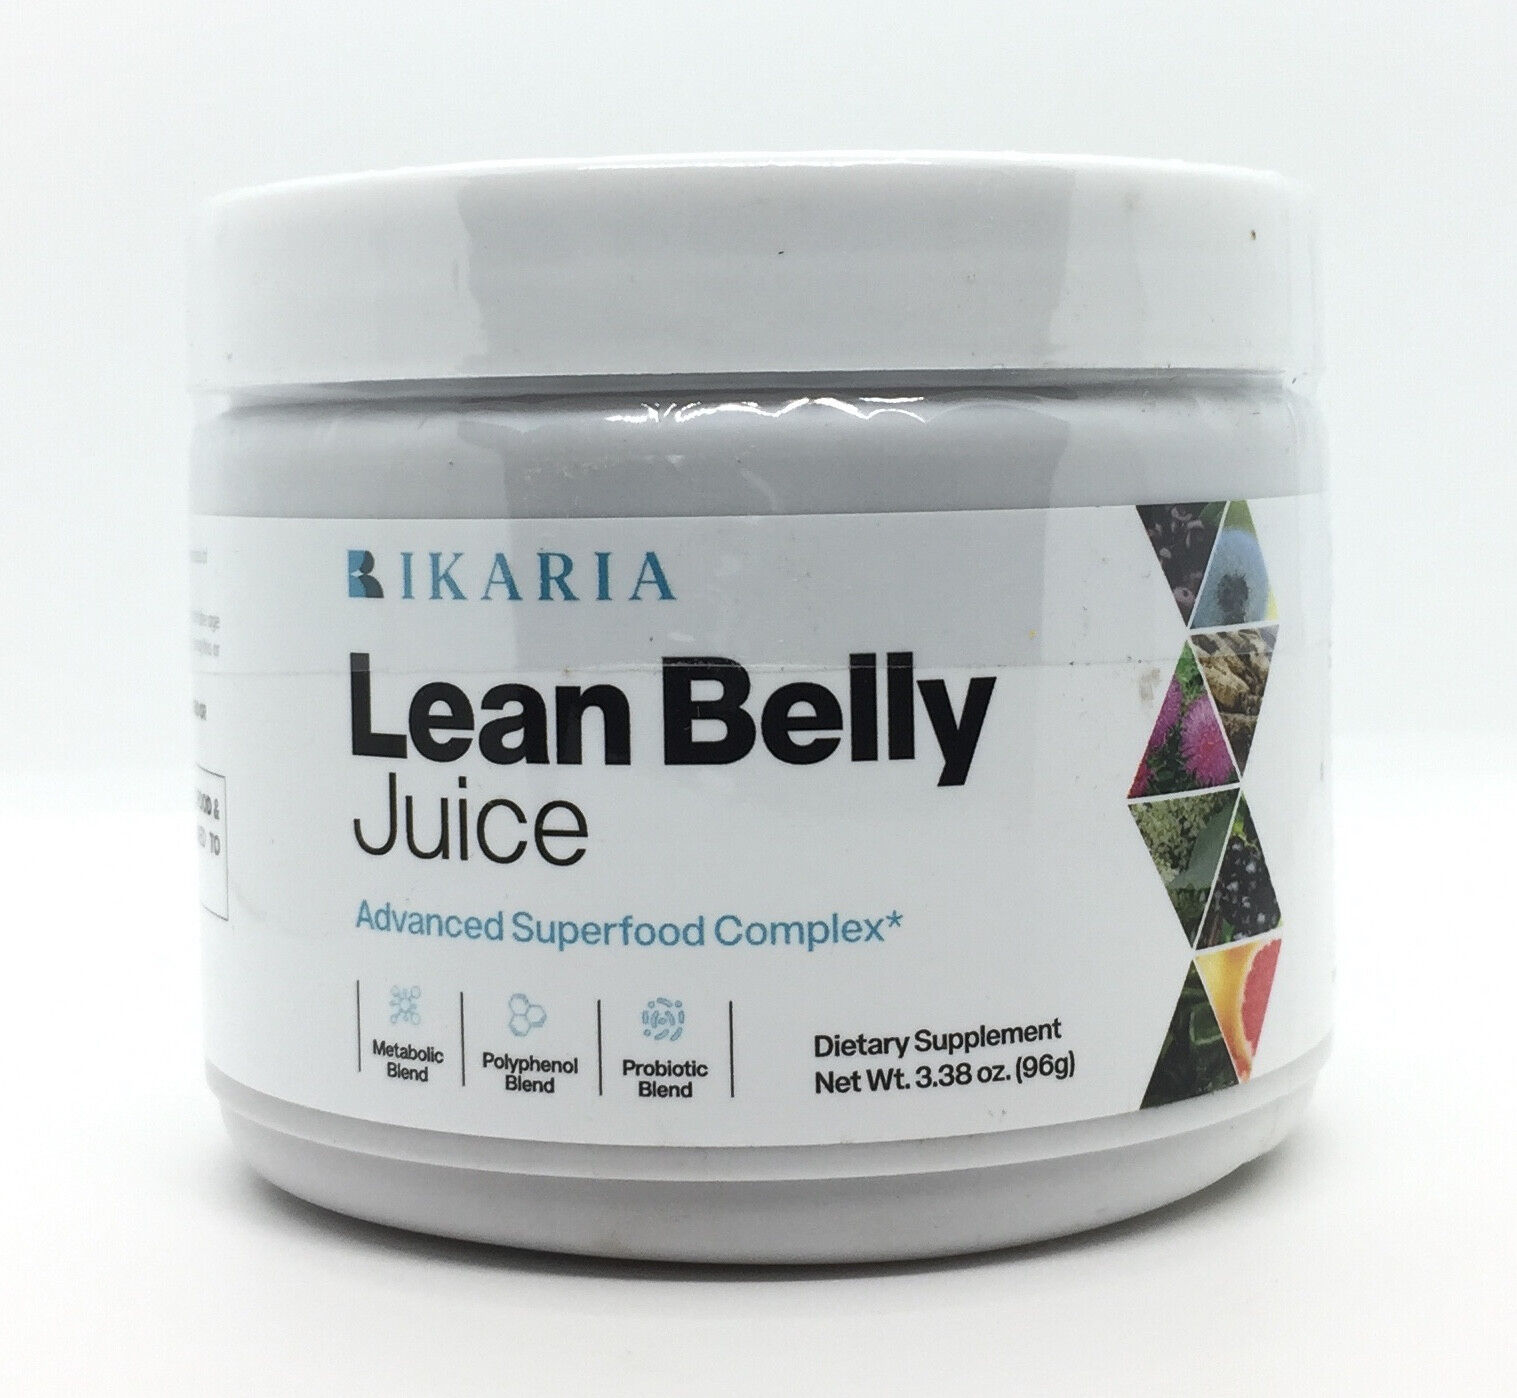 is ikaria lean belly juice a scam?